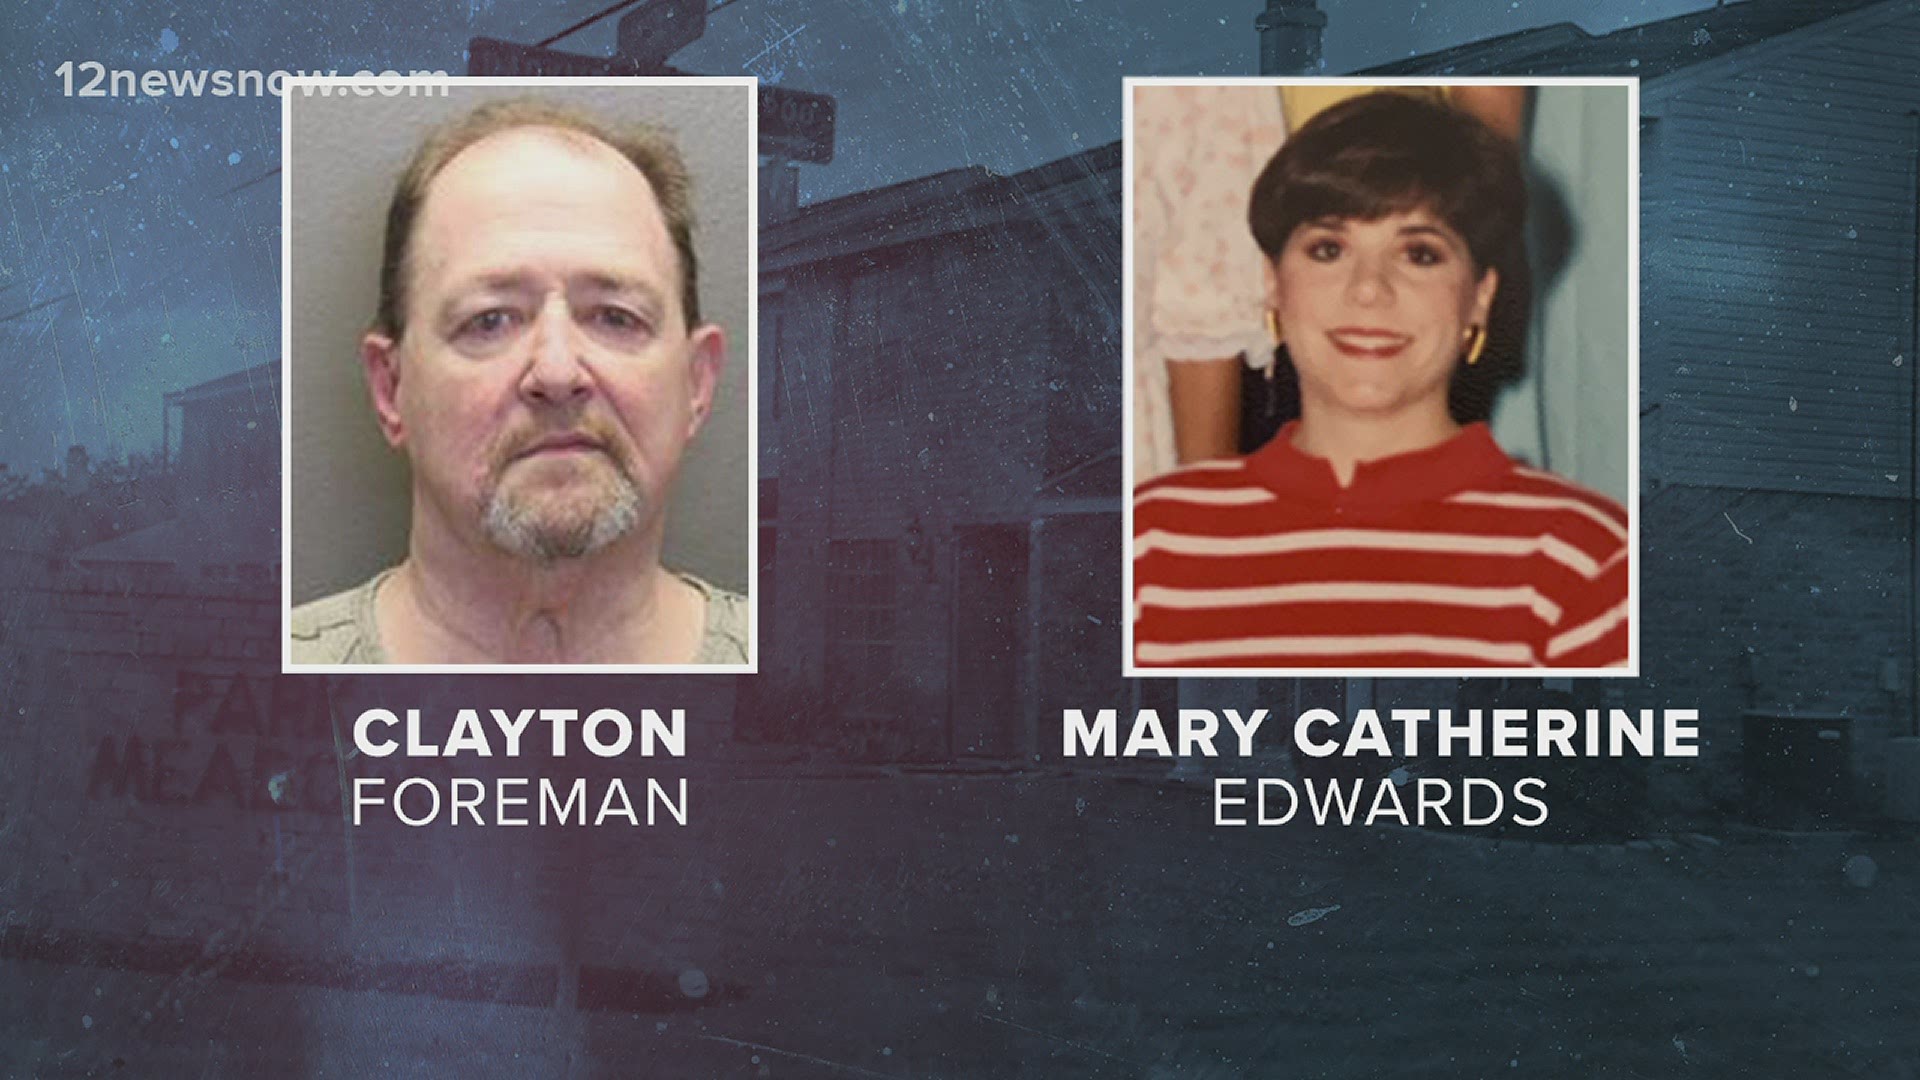 The judge ordered foreman to be picked by Jefferson County officials or the Texas Rangers by July 6 or be released.